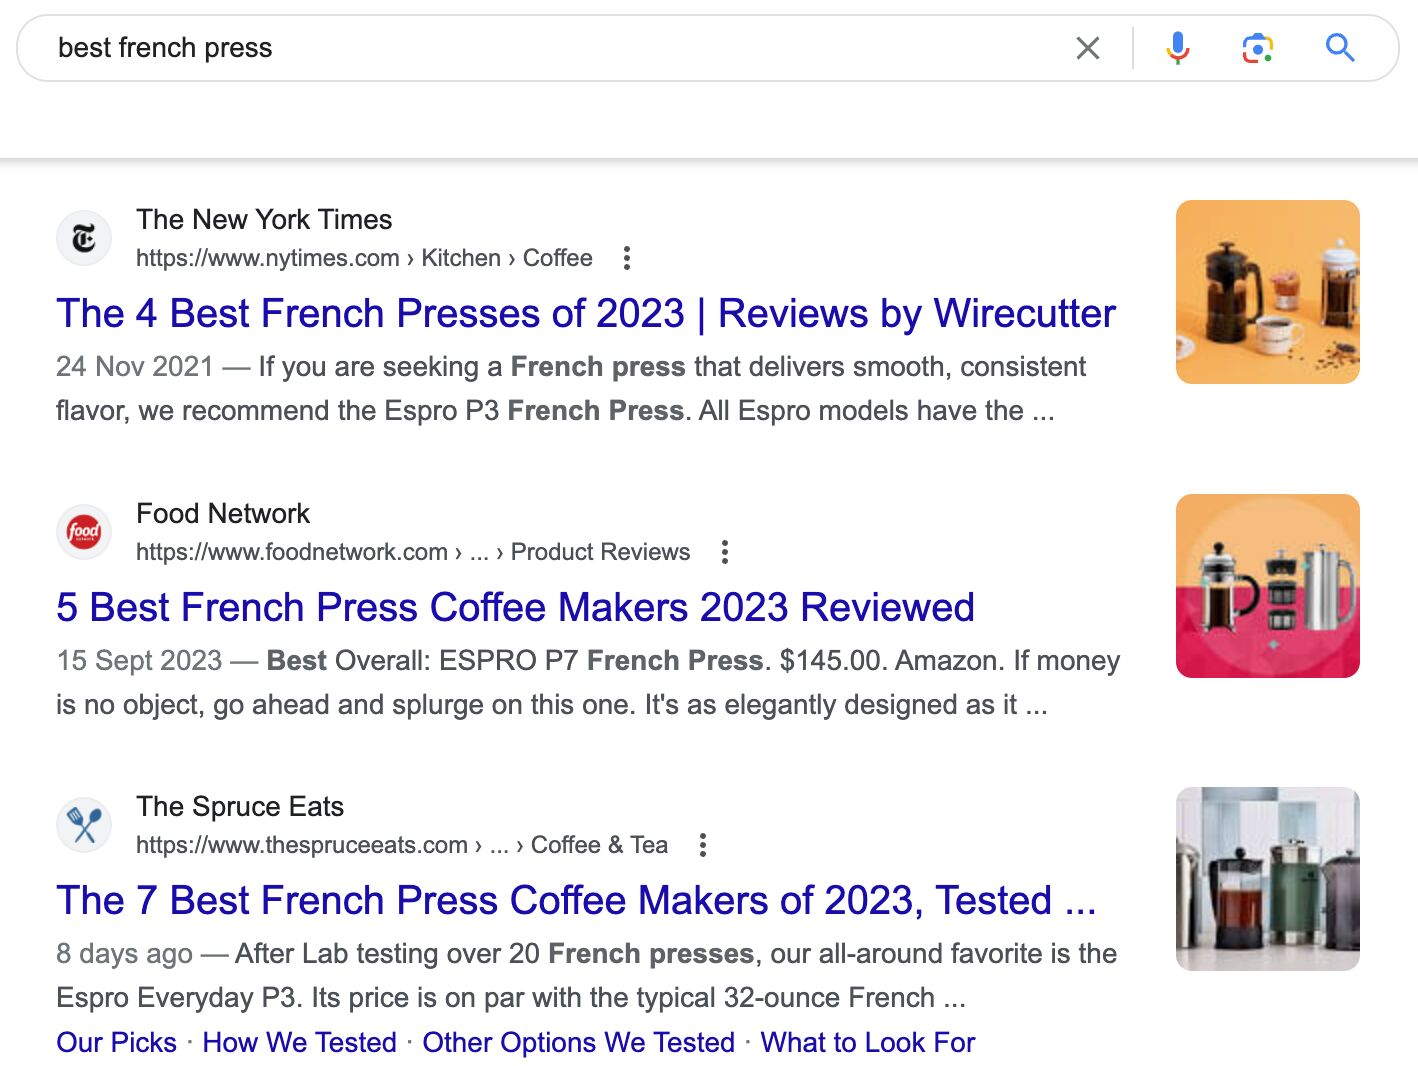 Search results for "best french press"